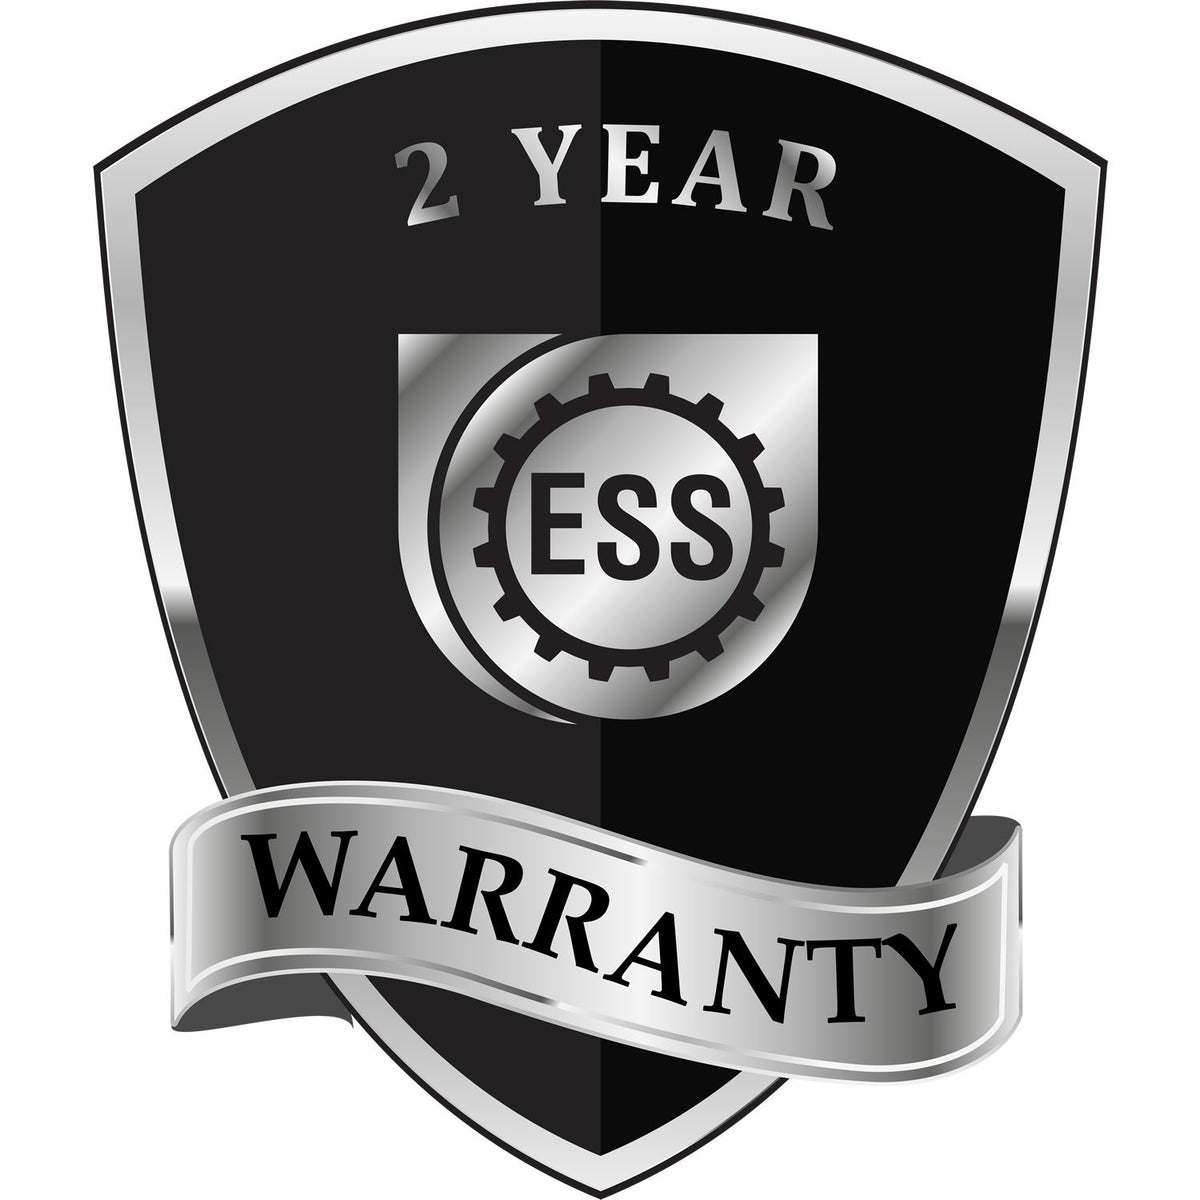 A black and silver badge or emblem showing warranty information for the Gift Indiana Land Surveyor Seal